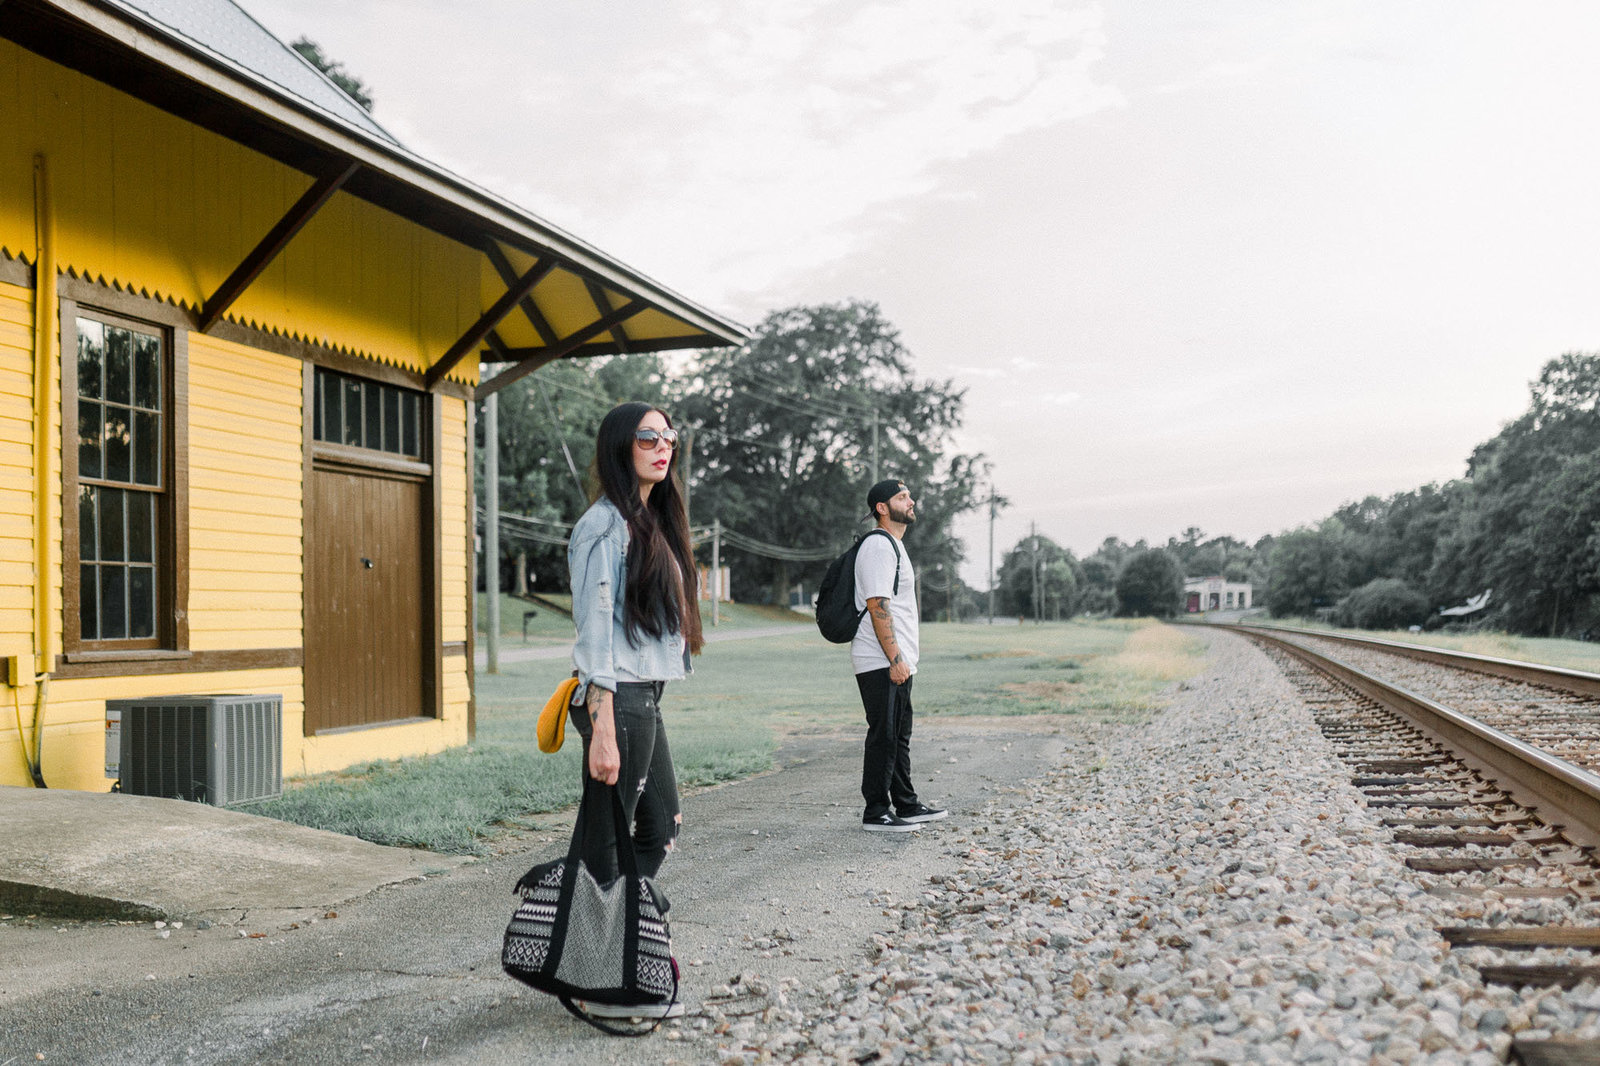 Waiting by the train tracks in Newnan, Georgia captured by Staci Addison Photography